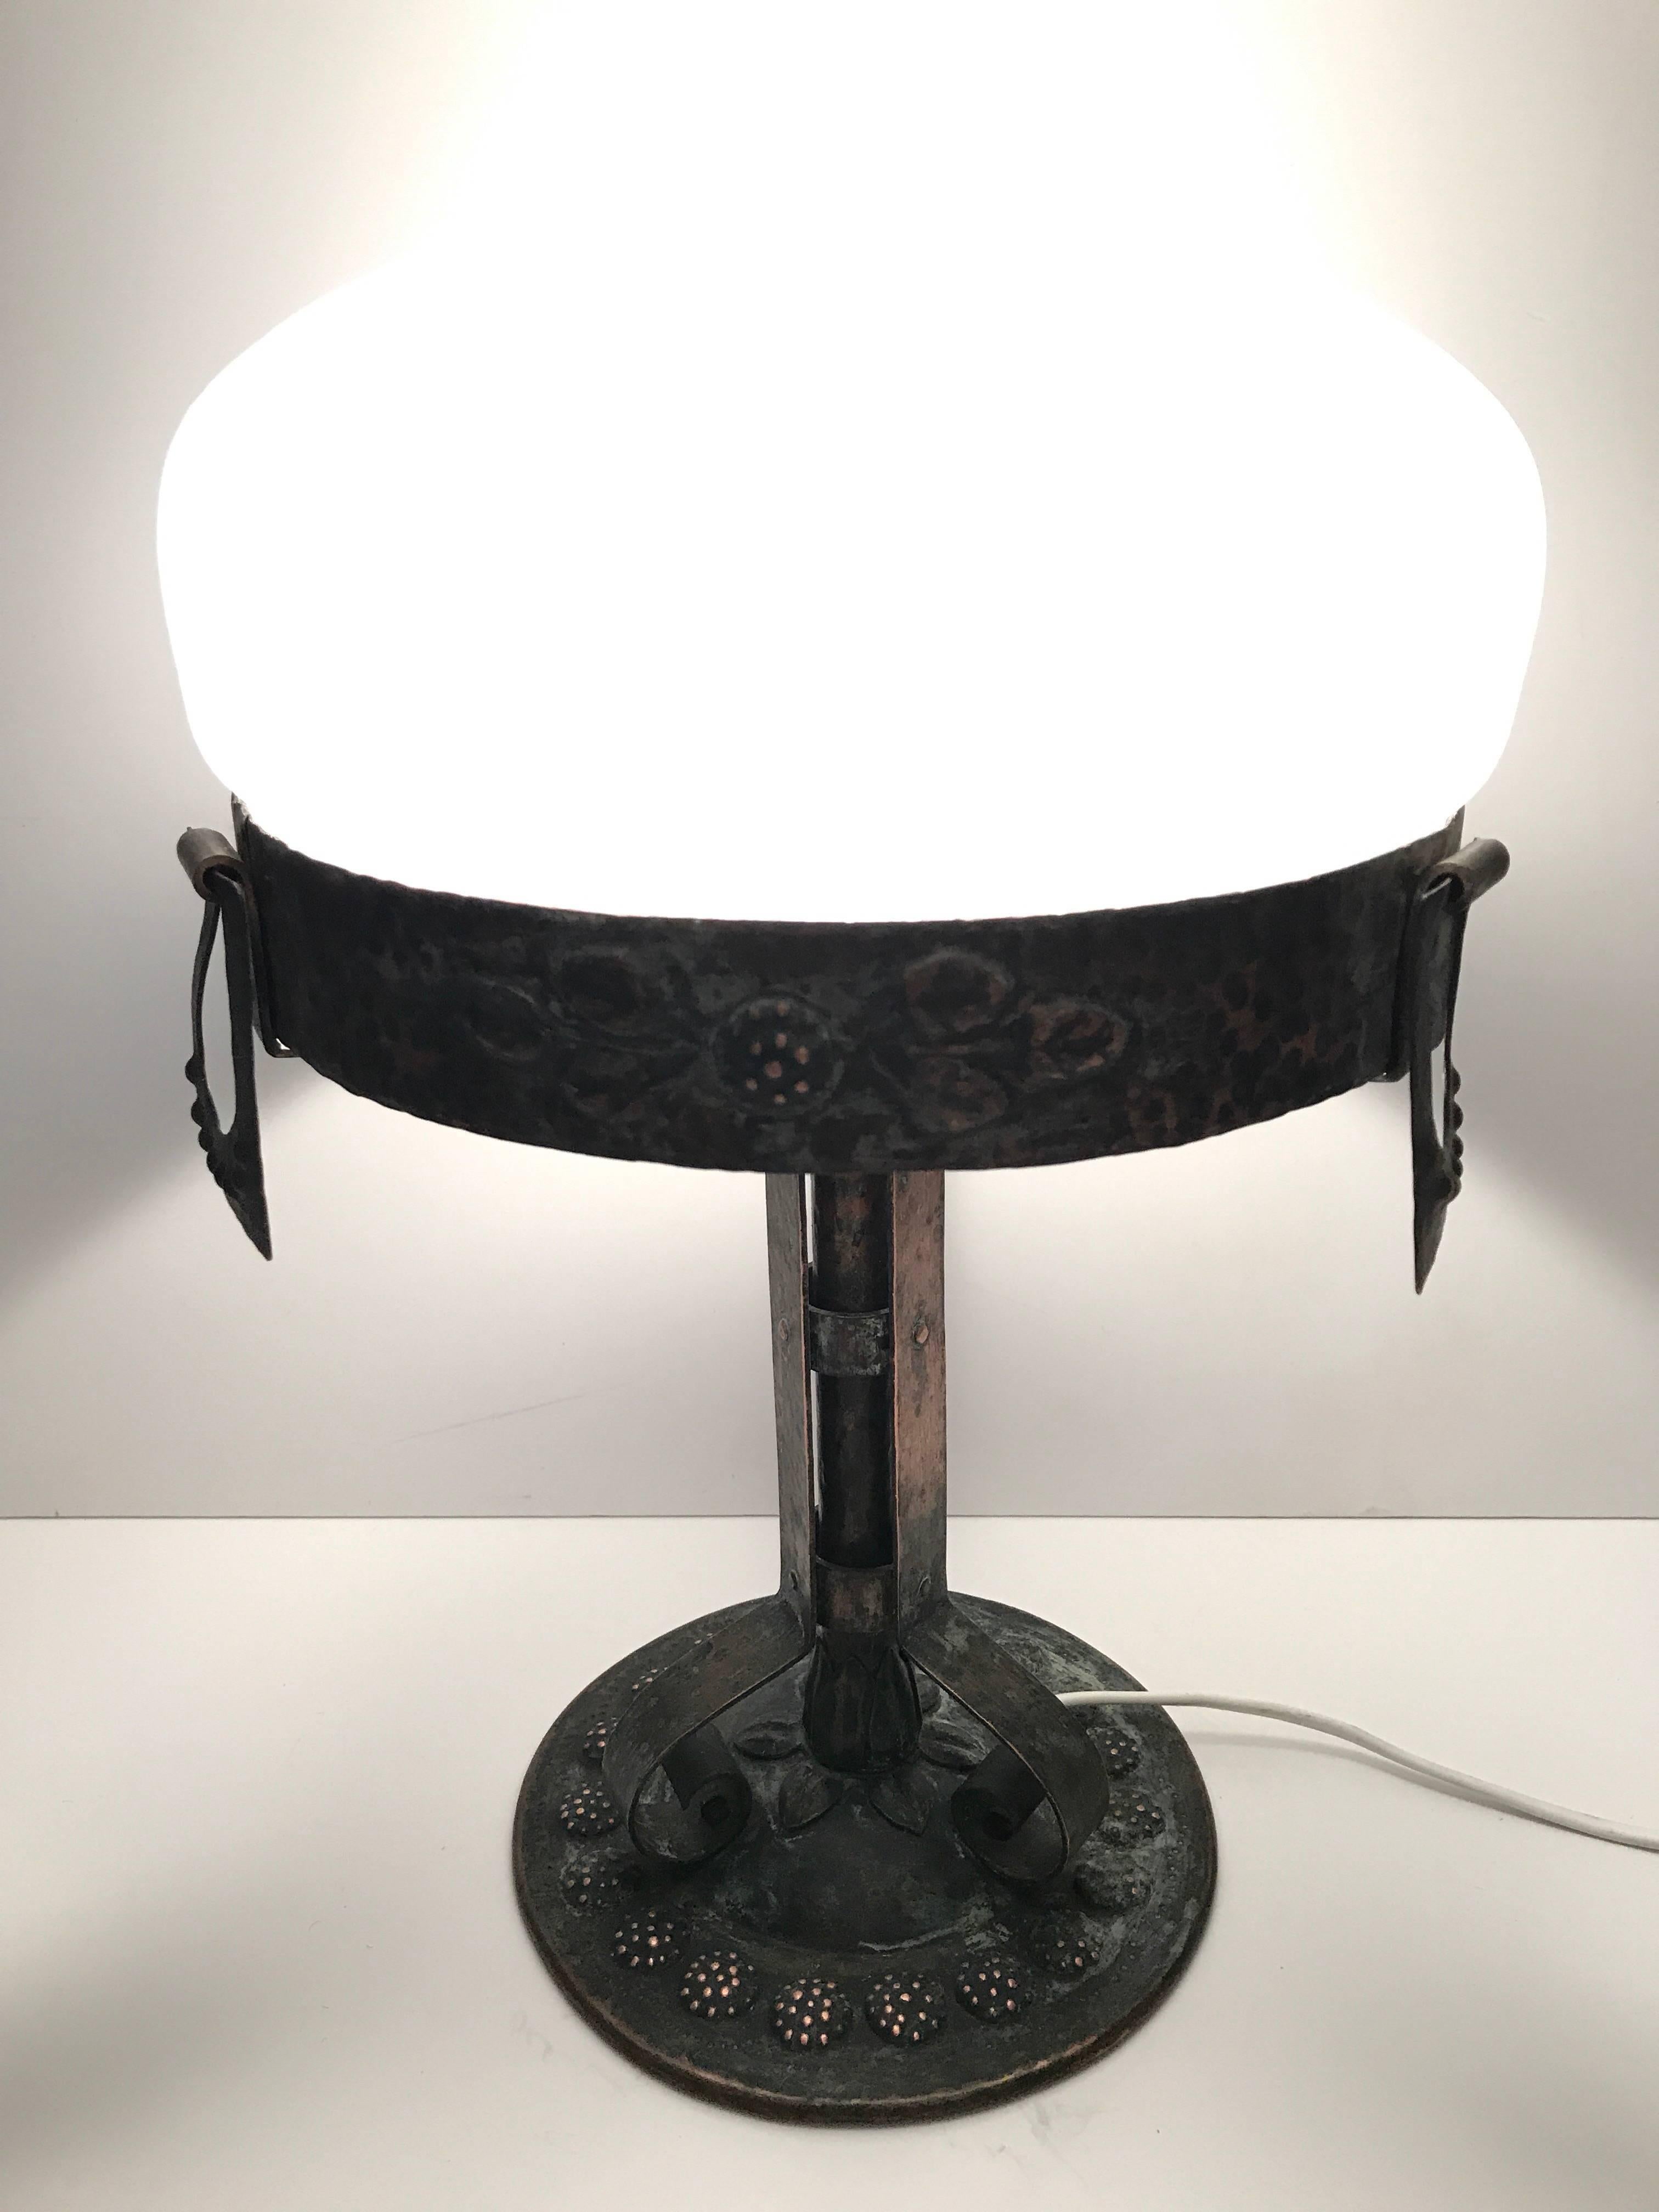 1915 Swedish Art Nouveau Jugendstil copper and frosted glass table lamp.
A beautiful copper table lamp decorated with flowers along the rim and the base. The beautifully frosted glass shade with a crackle pattern was most likely made at Pukeberg